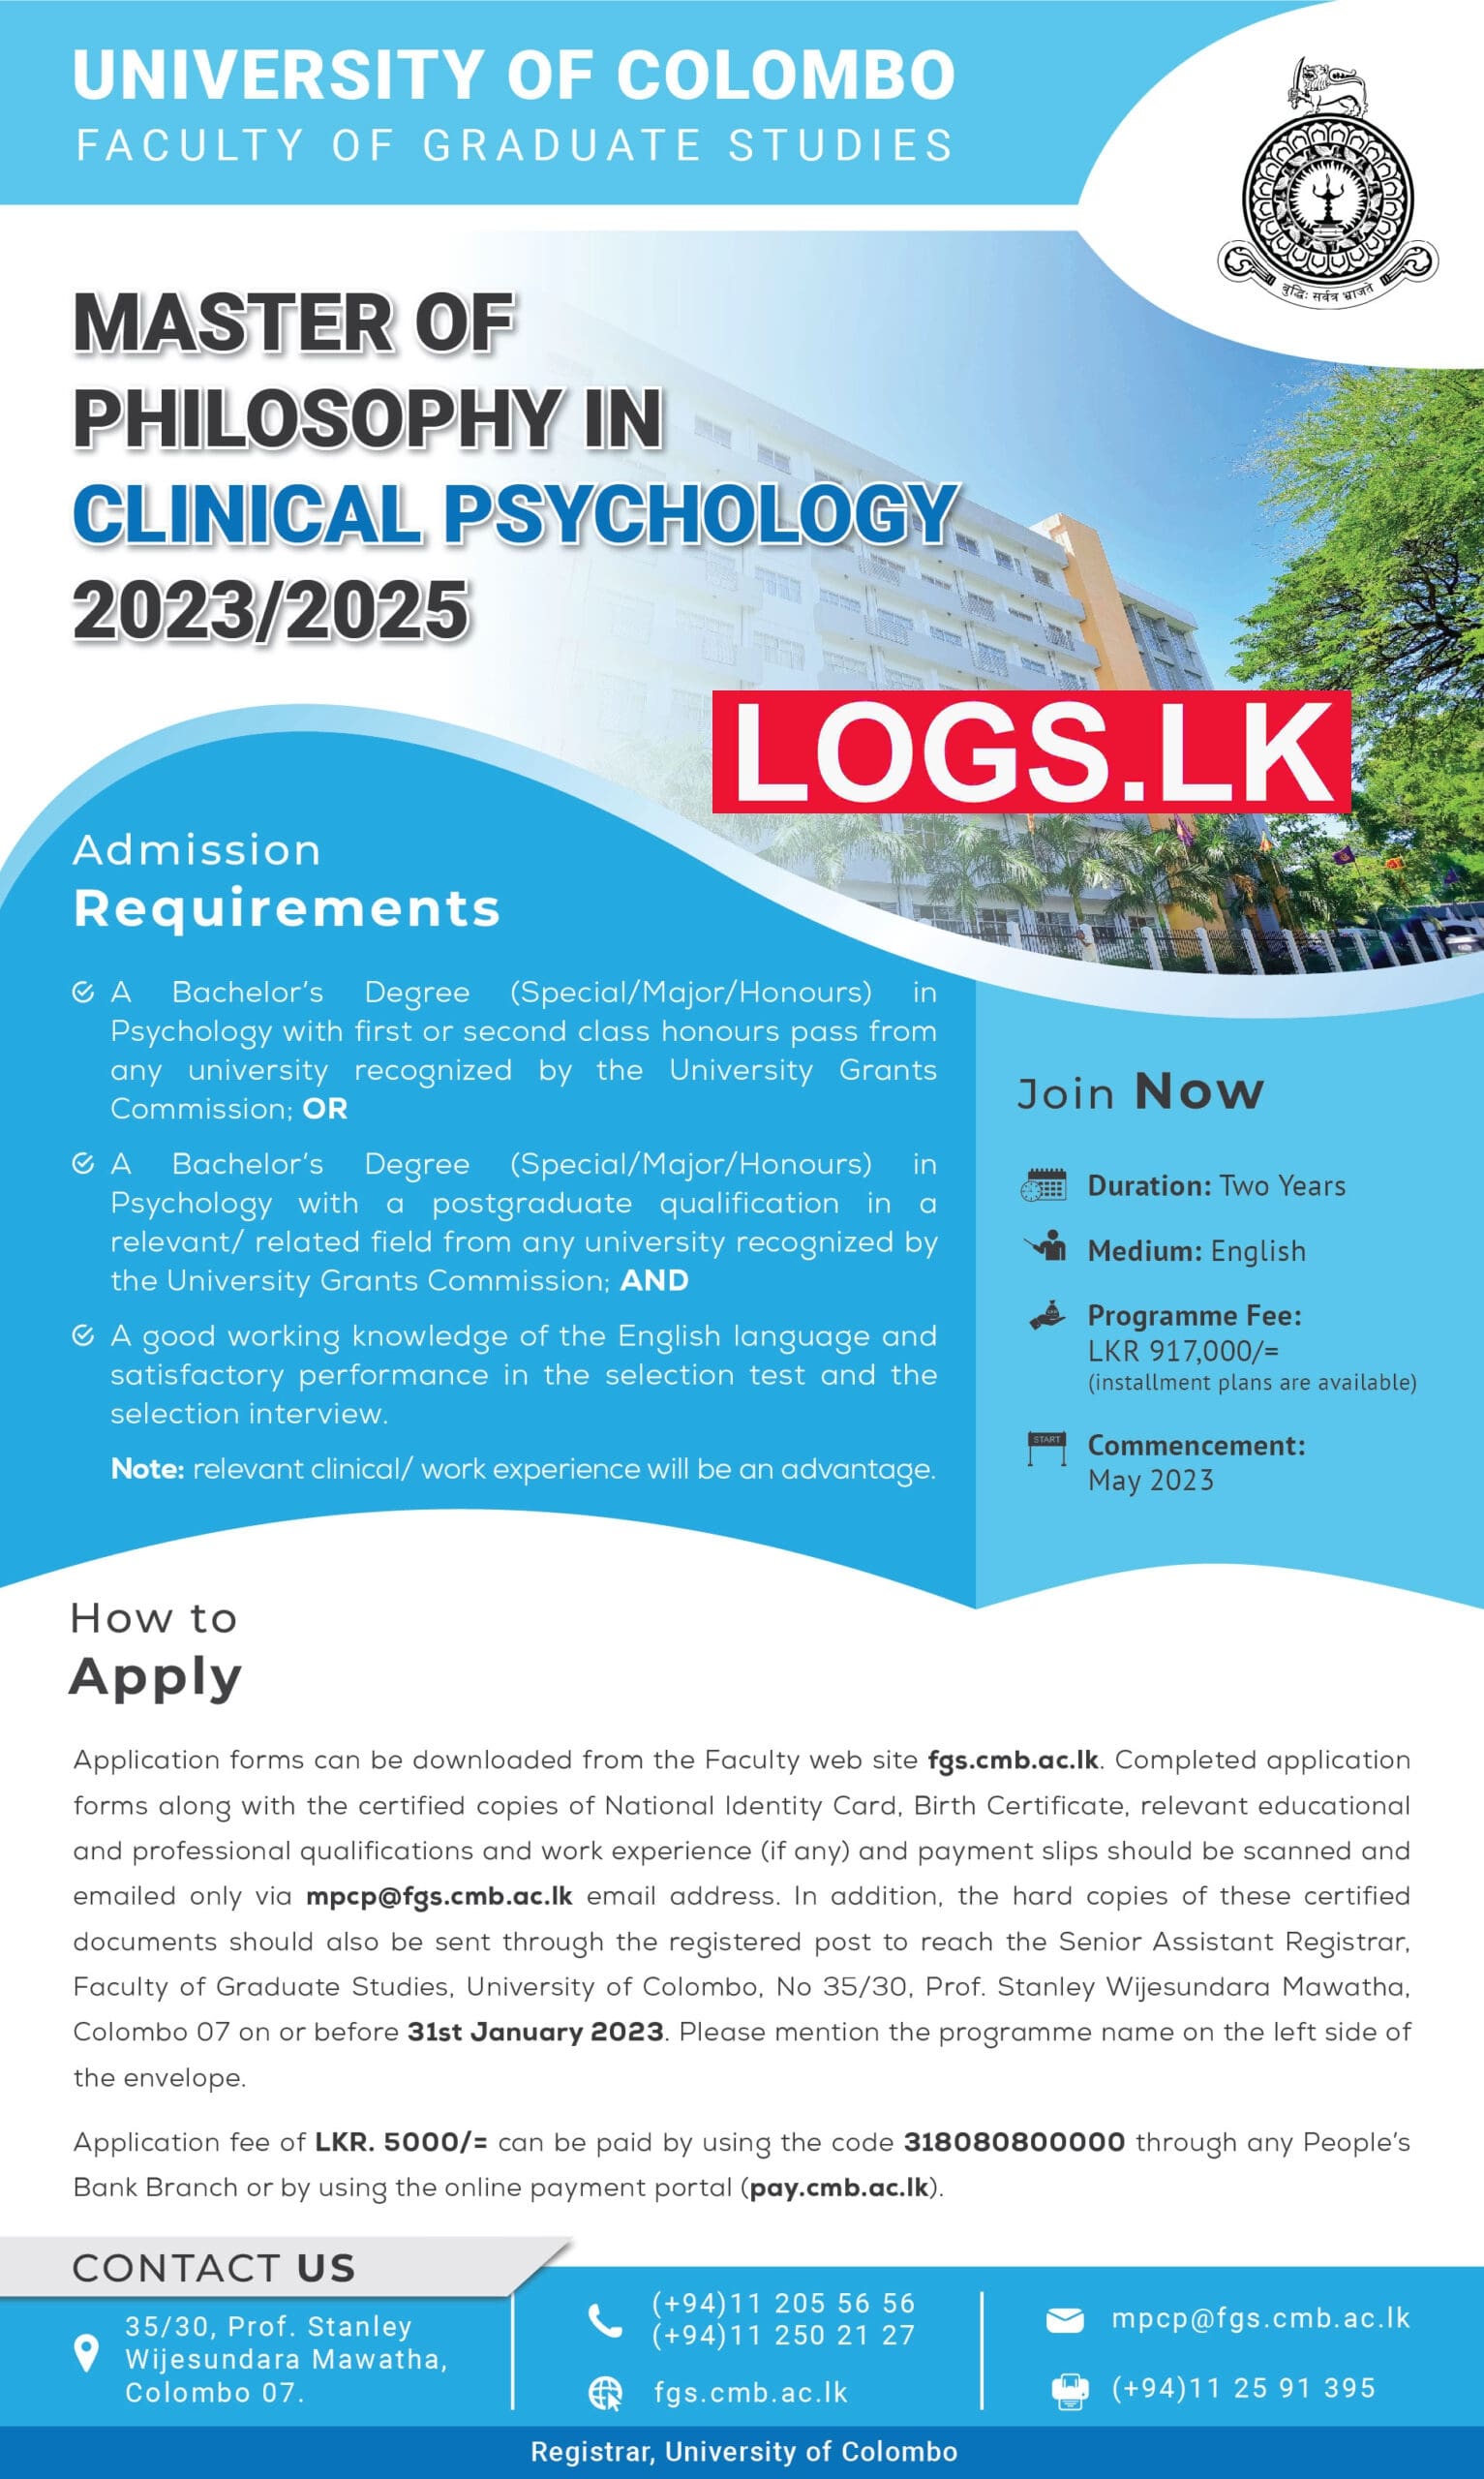 Master of Philosophy in Clinical Psychology 2023/2025 Faculty of Graduate Studies, University of Colombo Application Form, Details Download